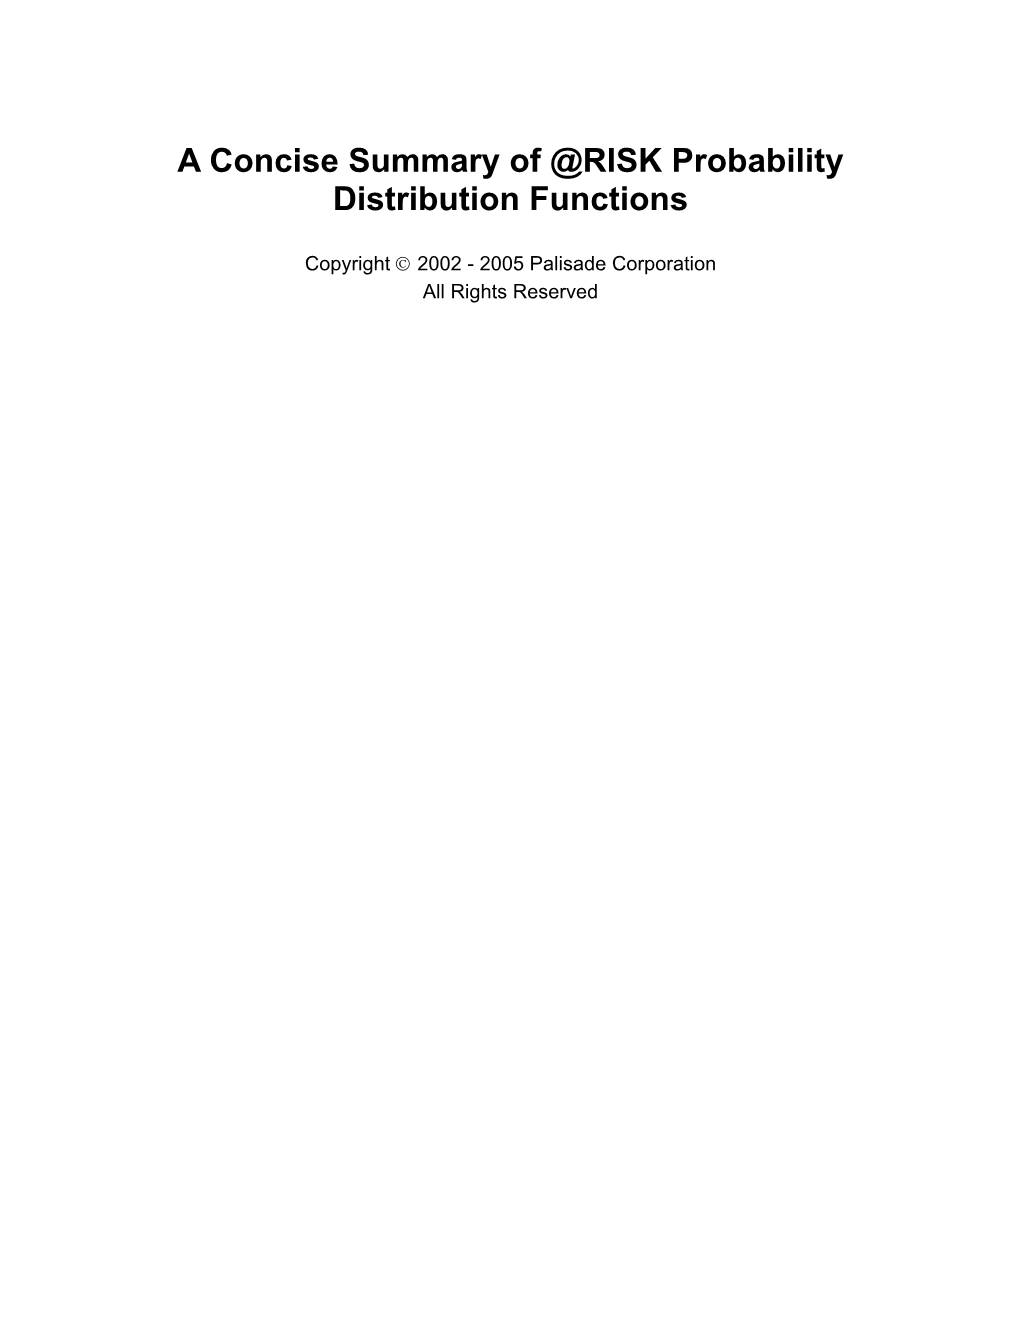 A Concise Summary of @RISK Probability Distribution Functions